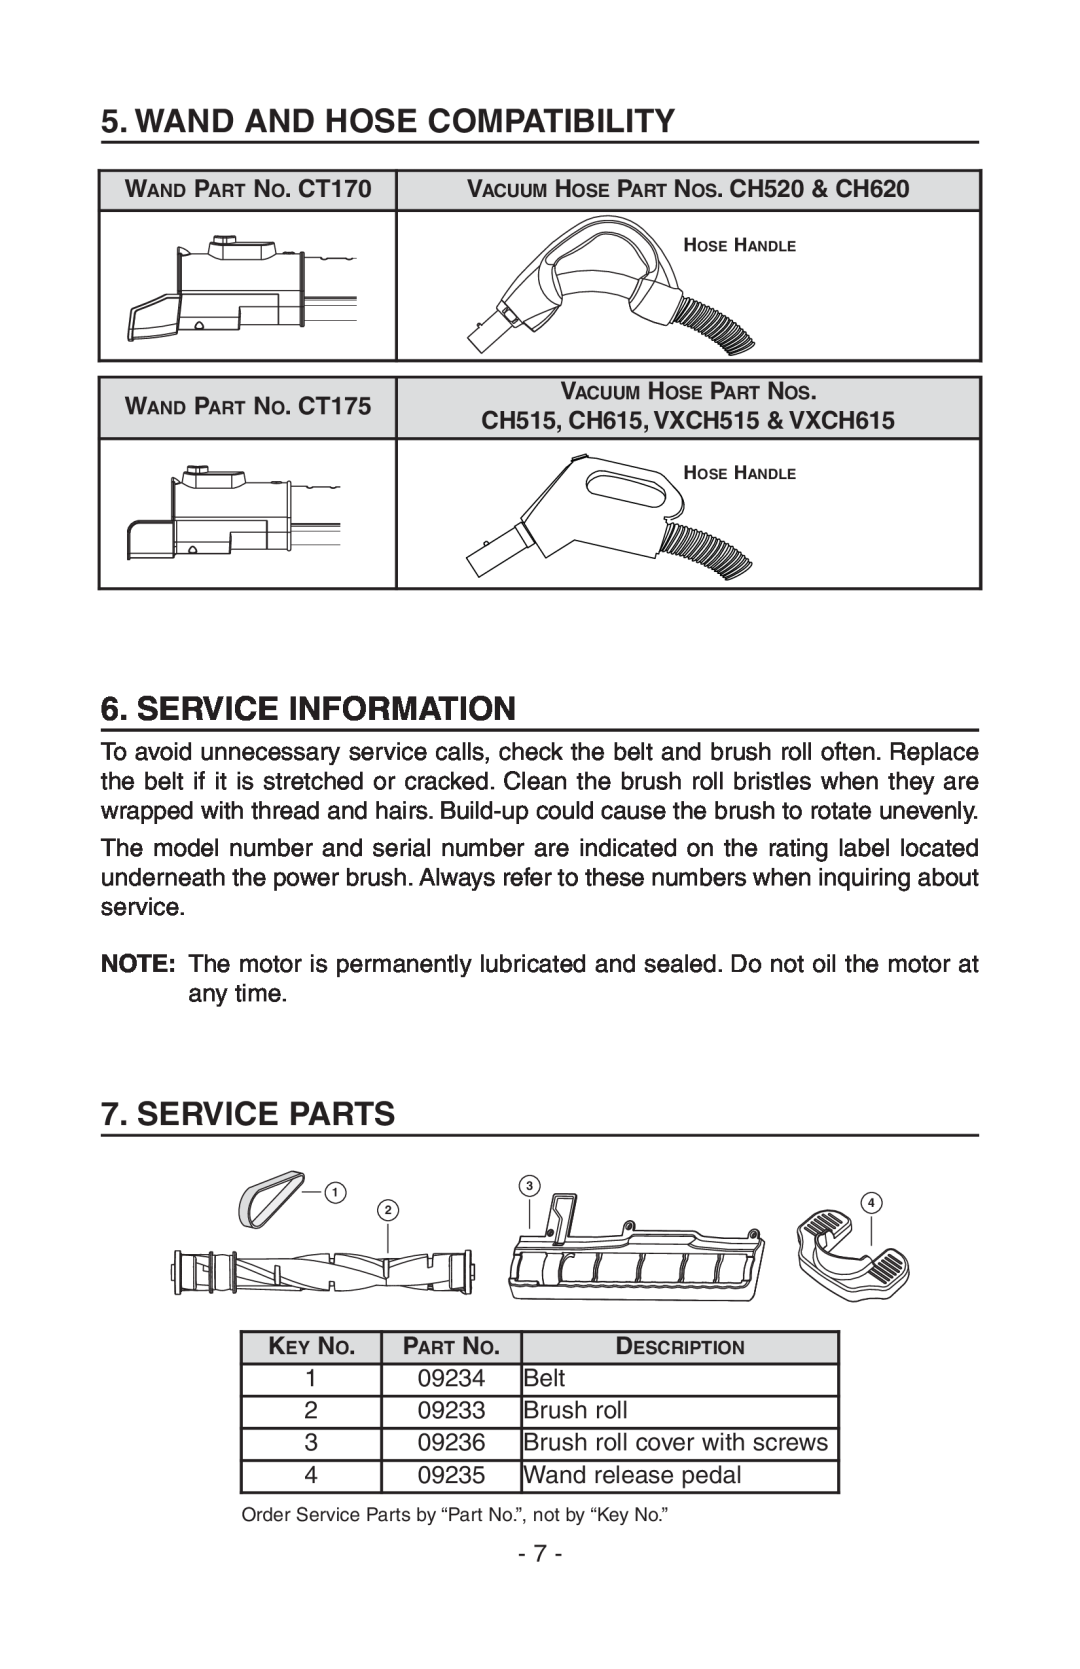 NuTone AB0008 Wand And Hose Compatibility, Service Information, Service Parts, WAND PART NO. CT170, WAND PART NO. CT175 